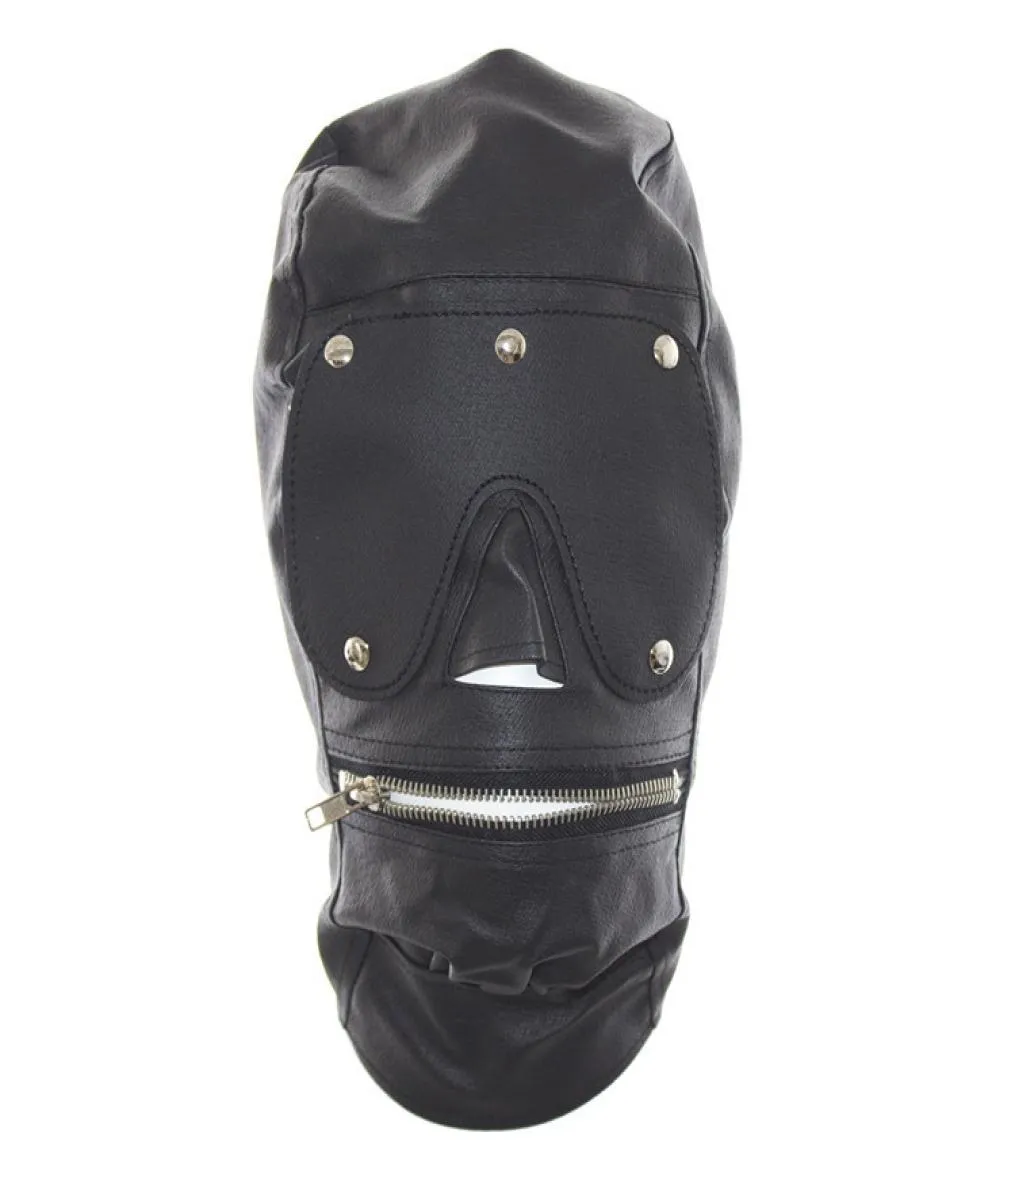 Top Grade PU Leather Full Face Mask With Zipper Muzzle Open Slave Zipper Mouth Fully Enclosed Headgear Hood For Role Play Sexy A5029697